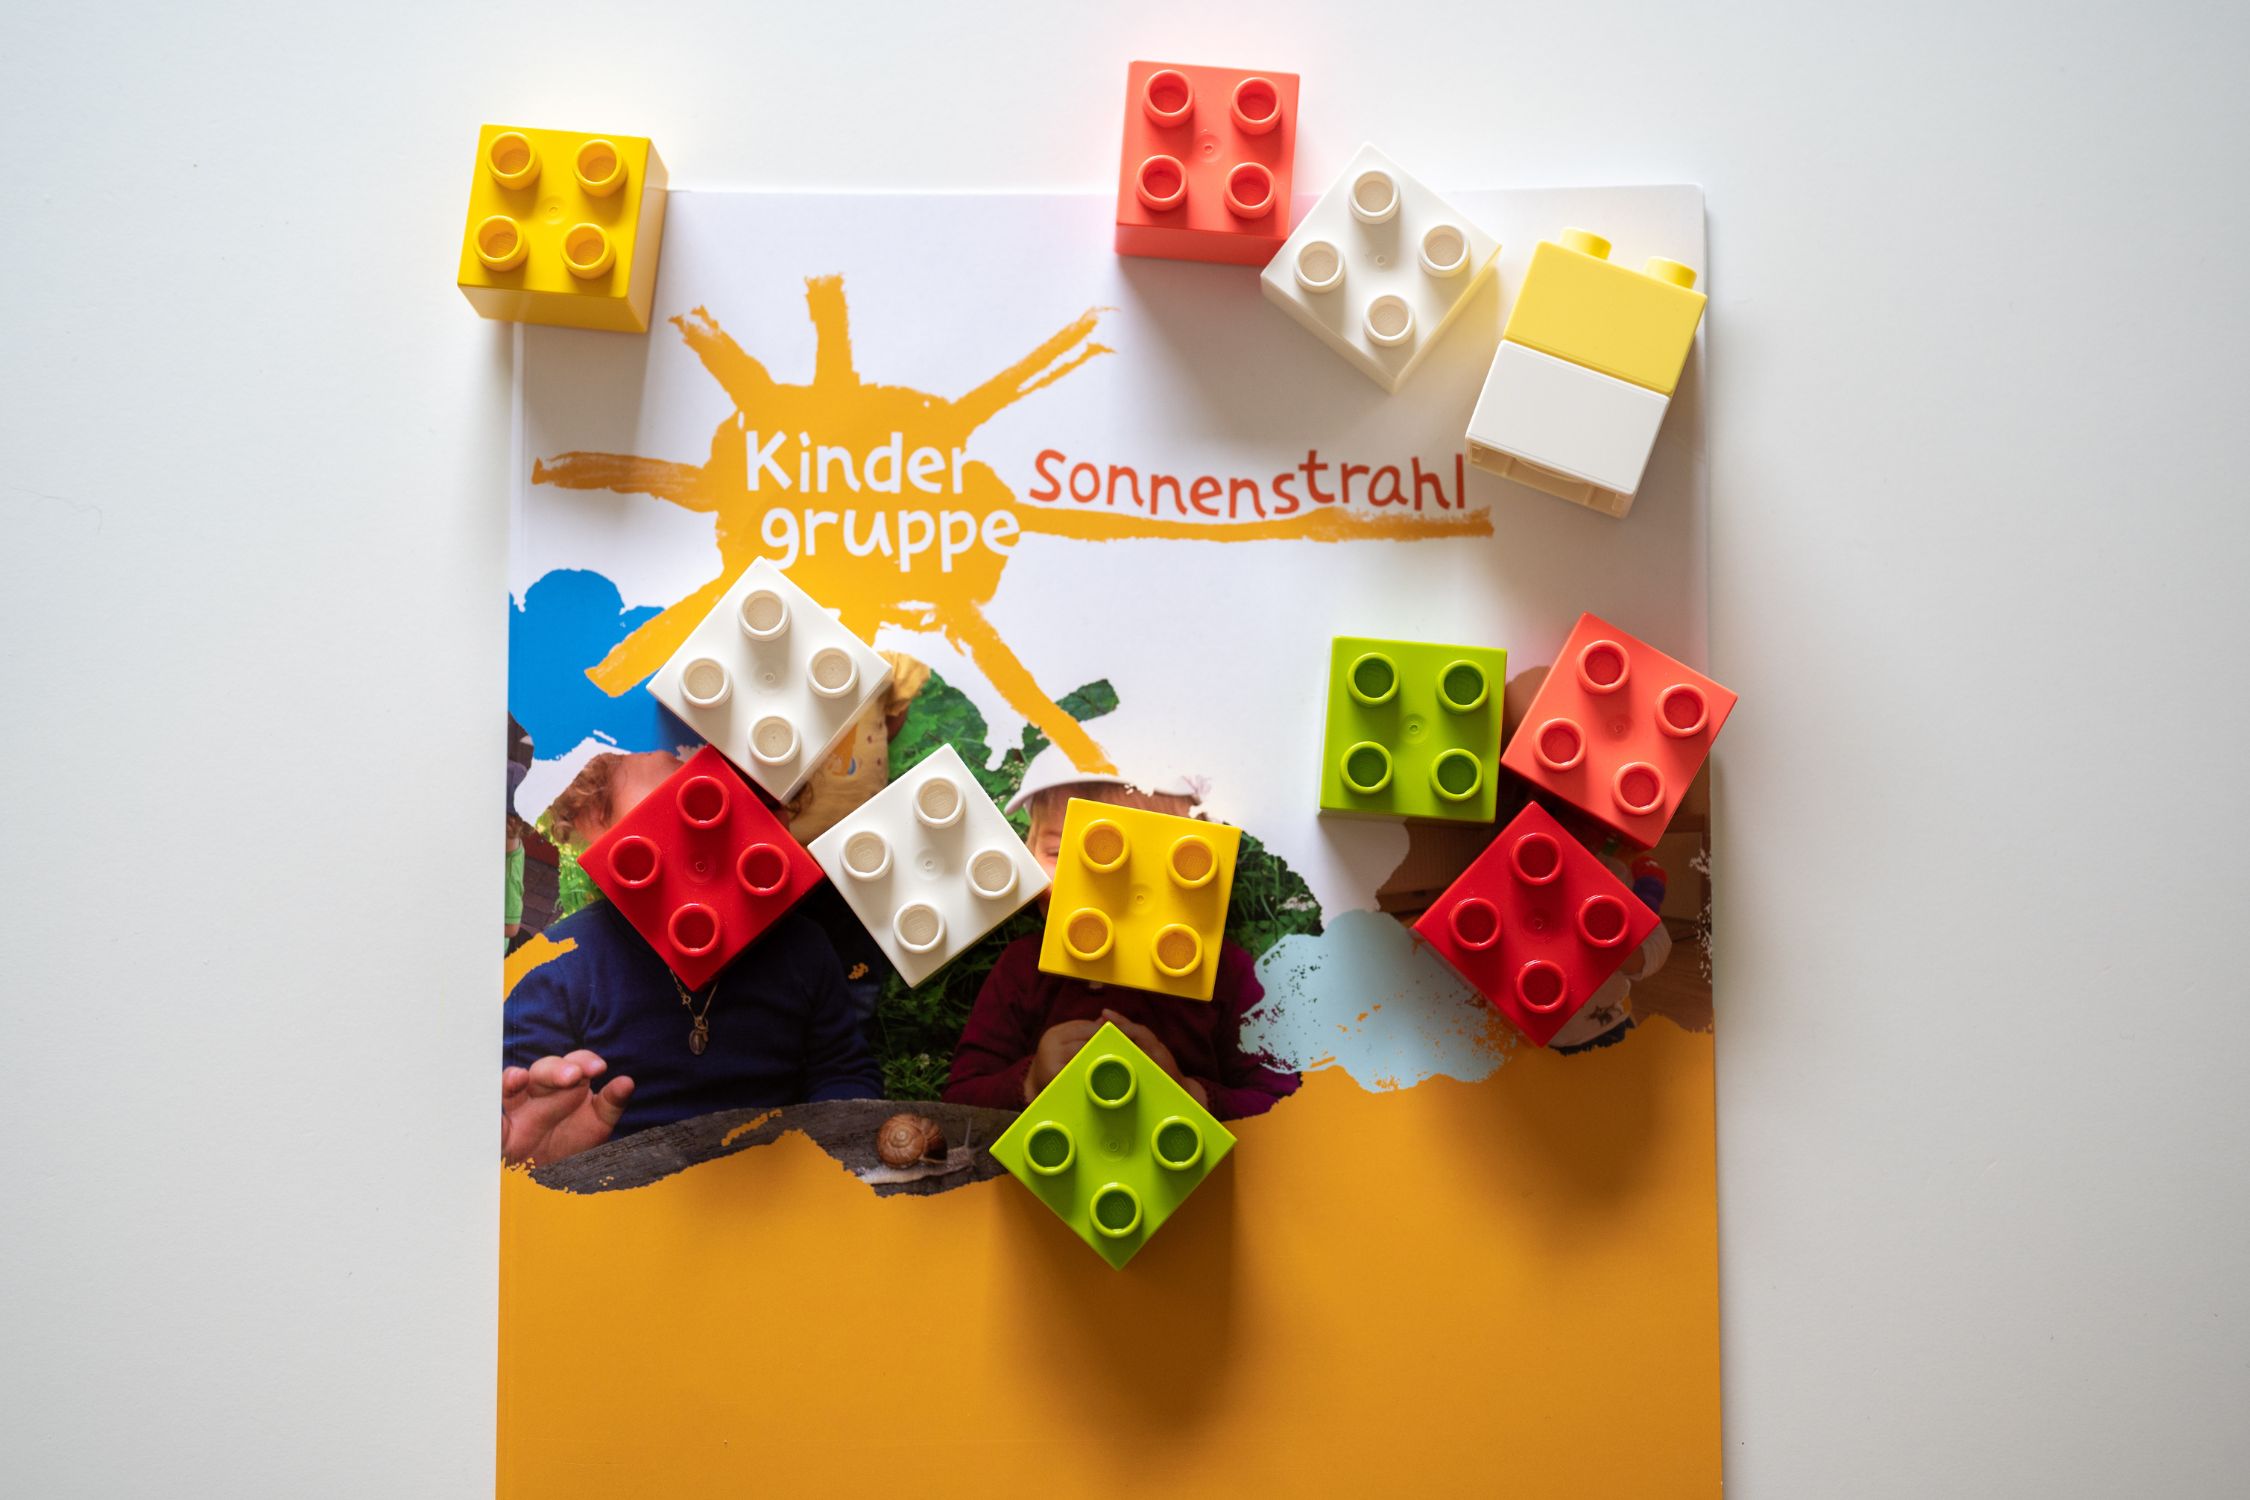 Children's group flyer with toy blocks